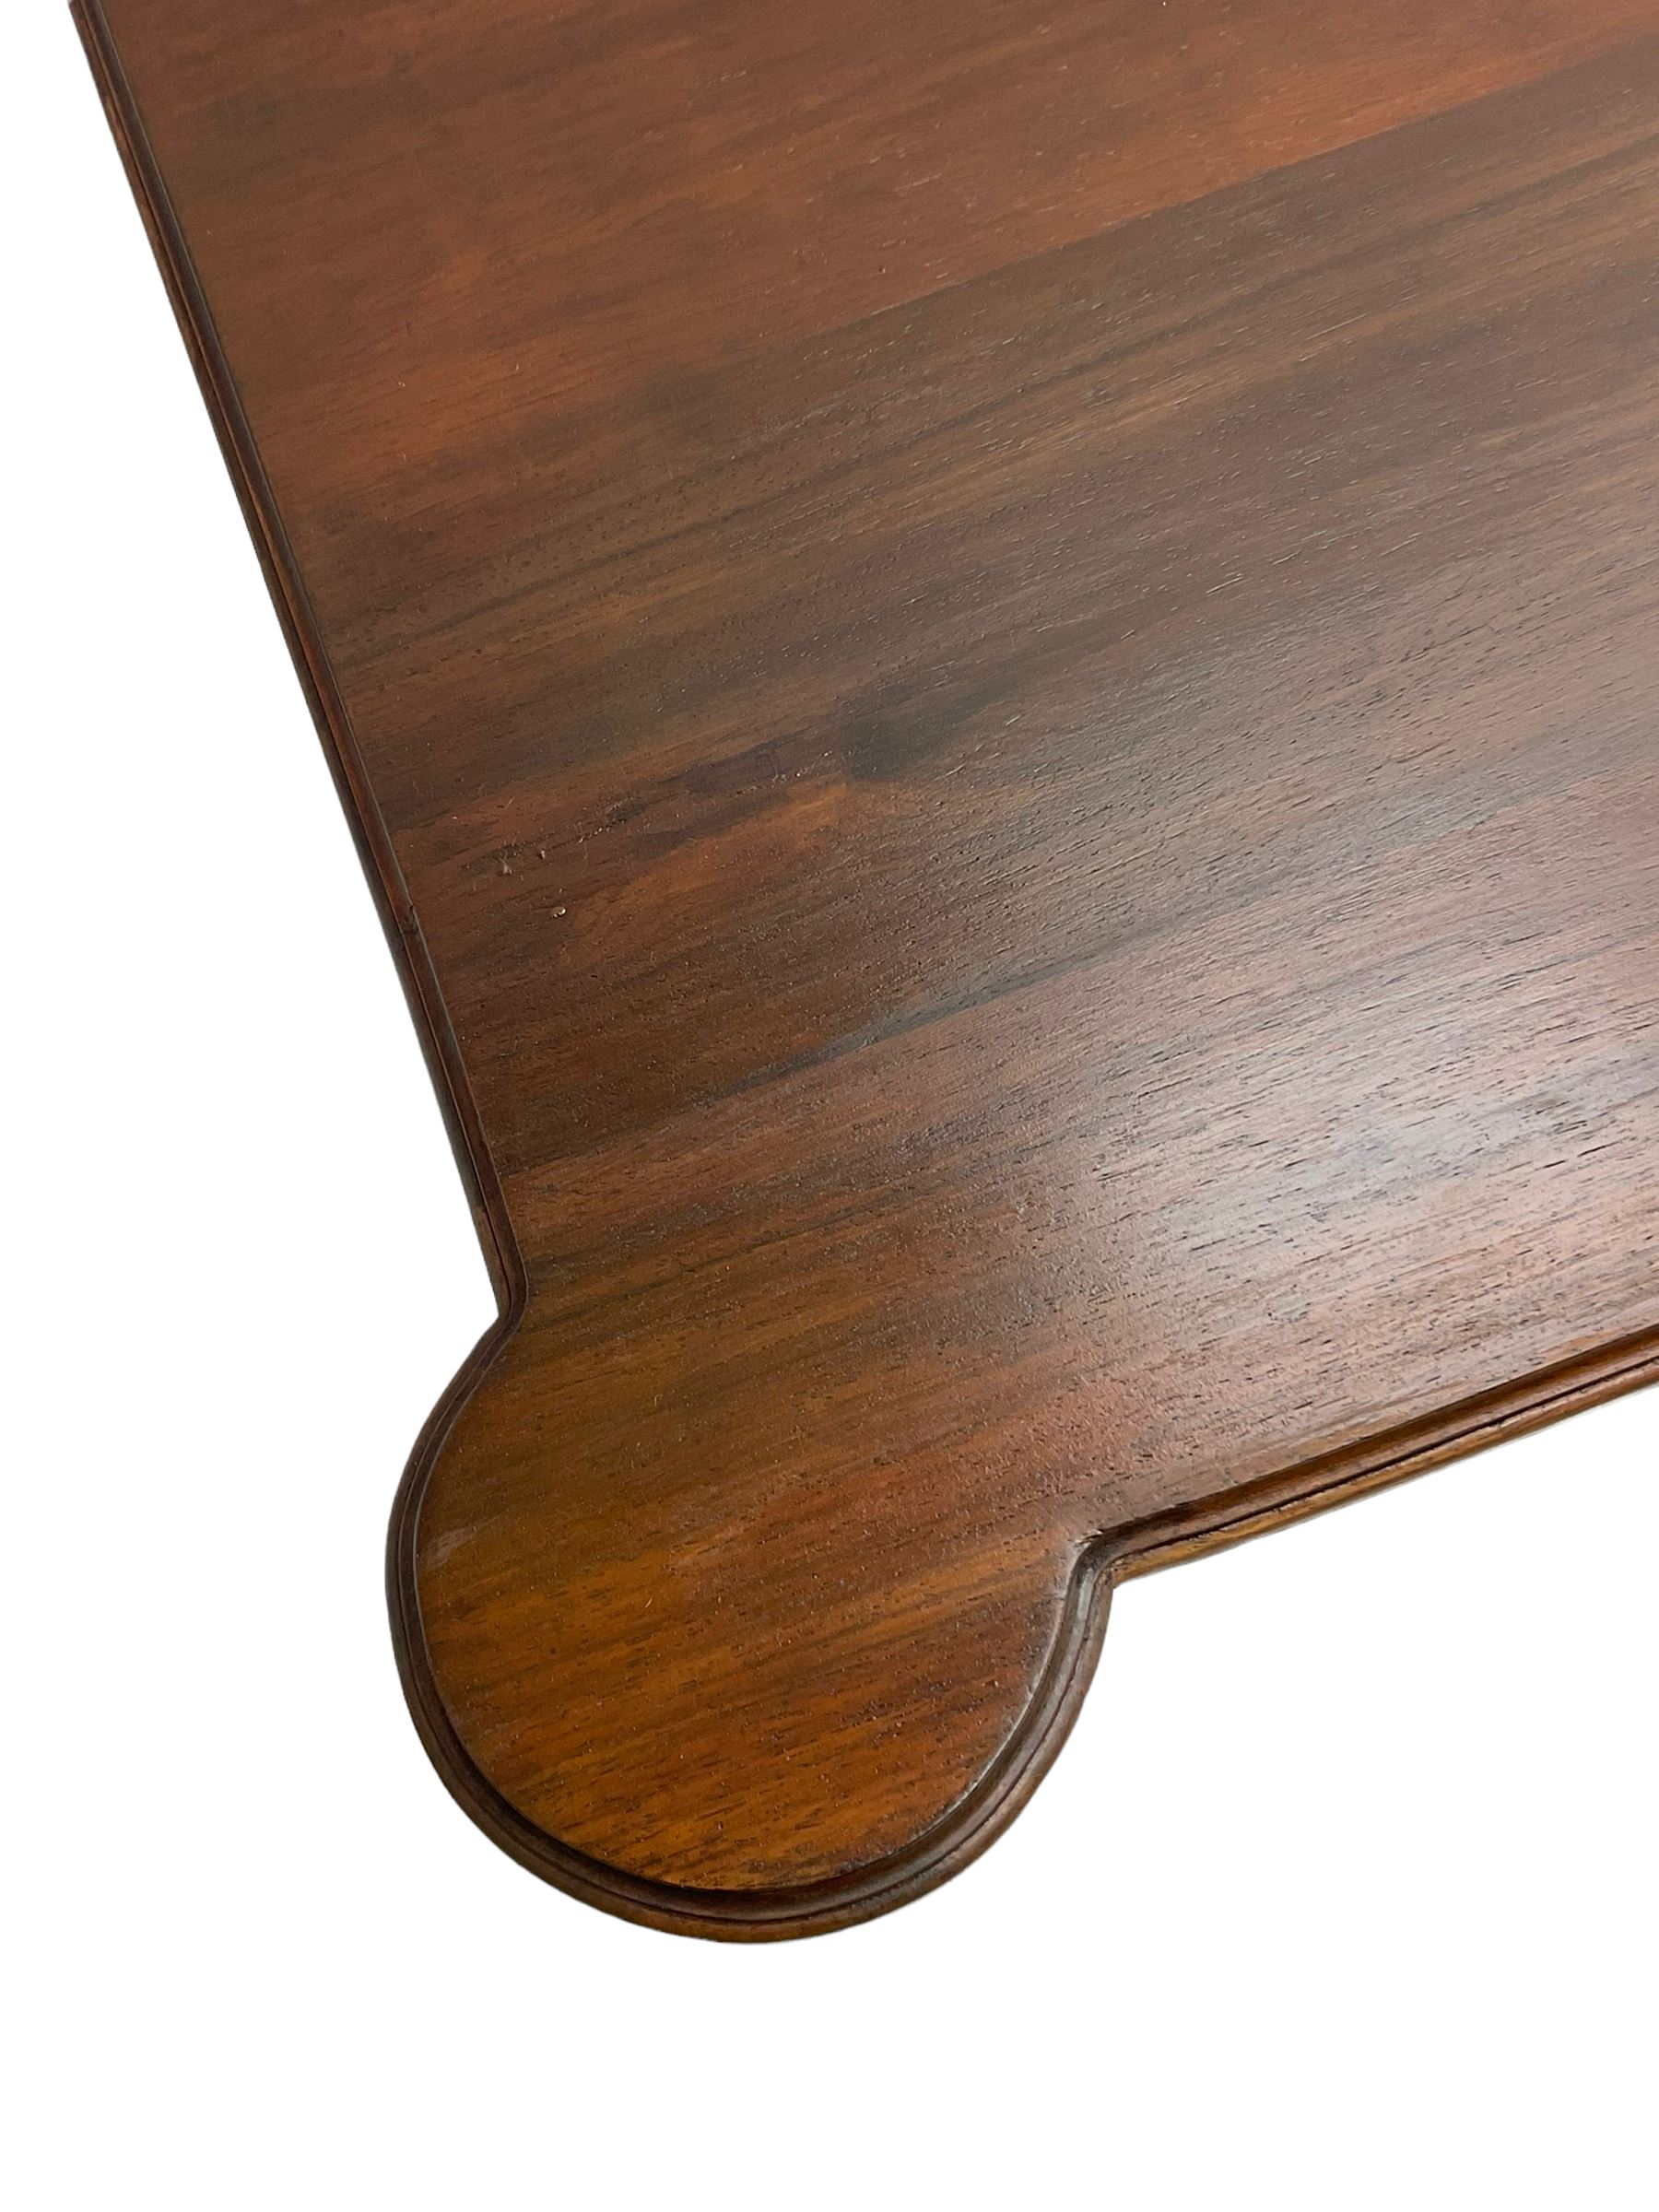 19th century rosewood centre table - Image 2 of 4